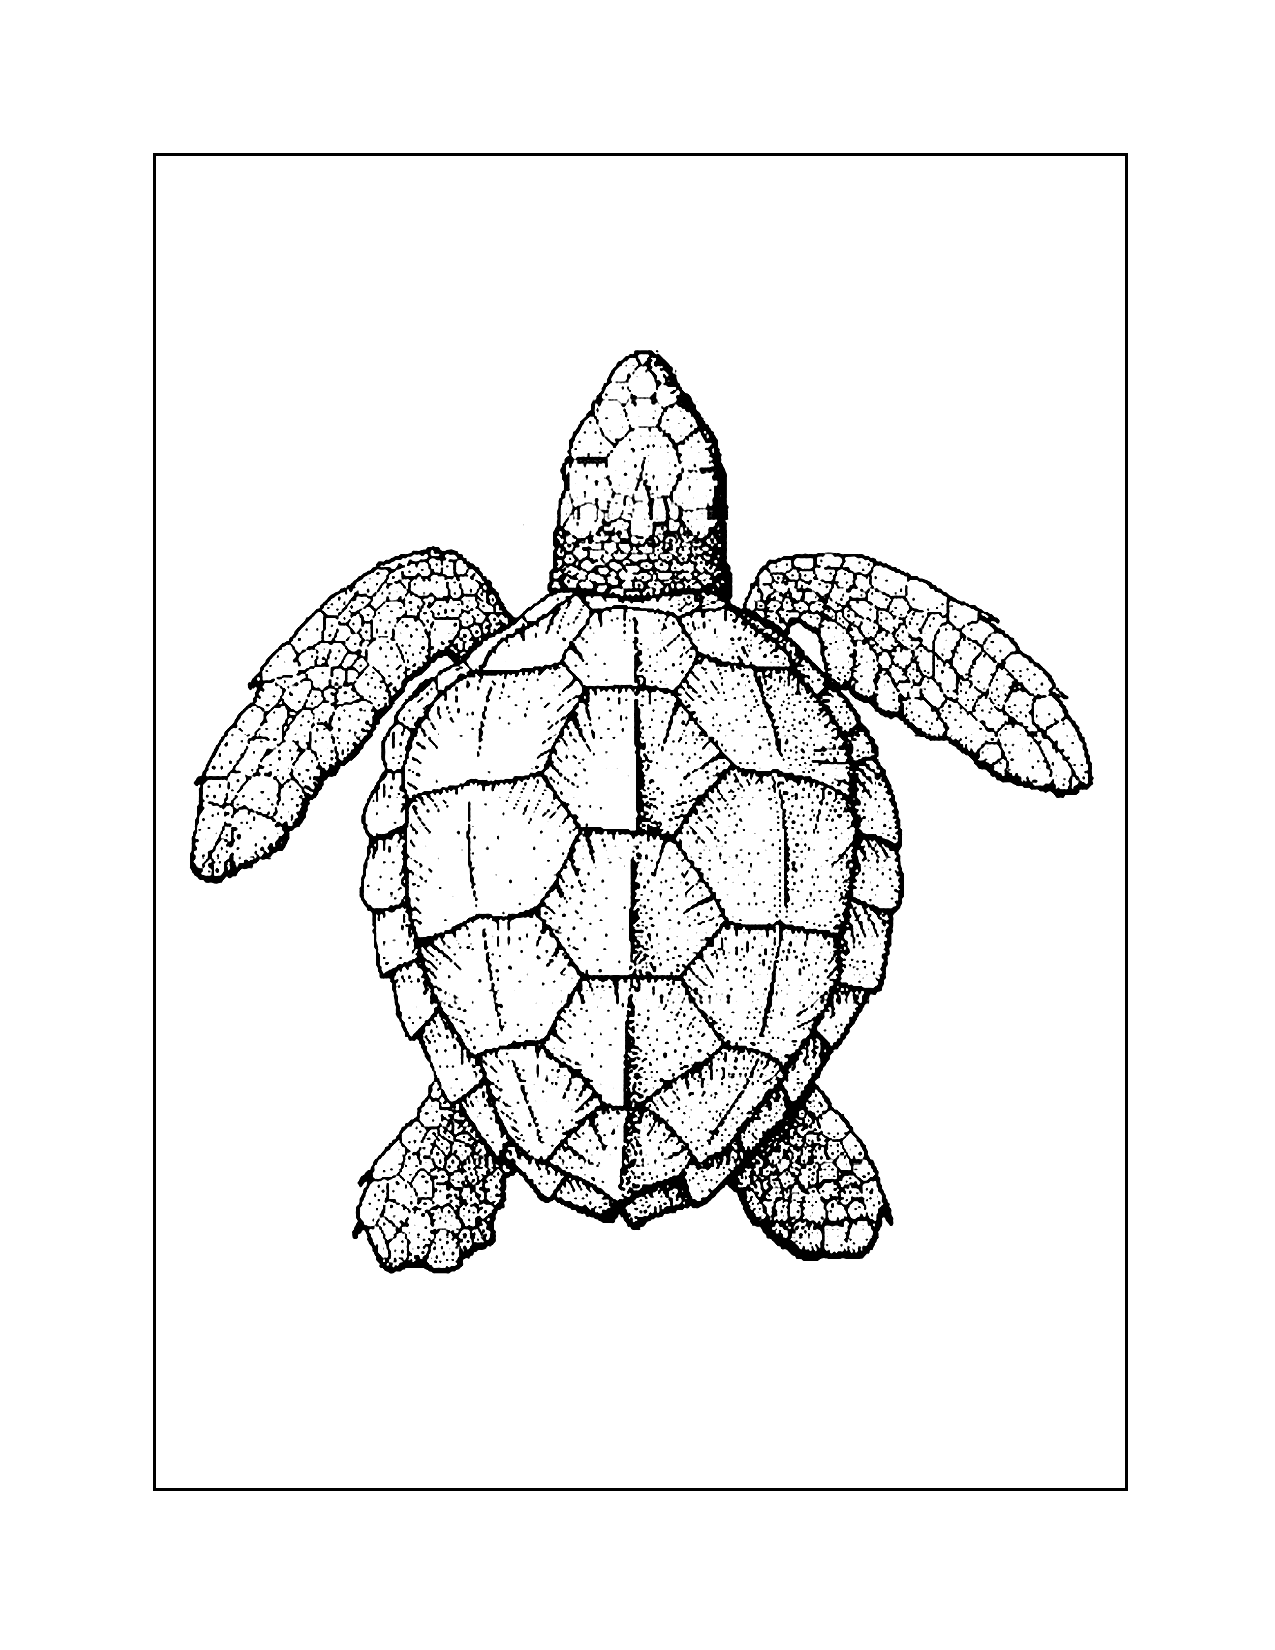 Turtle View From Above Coloring Page